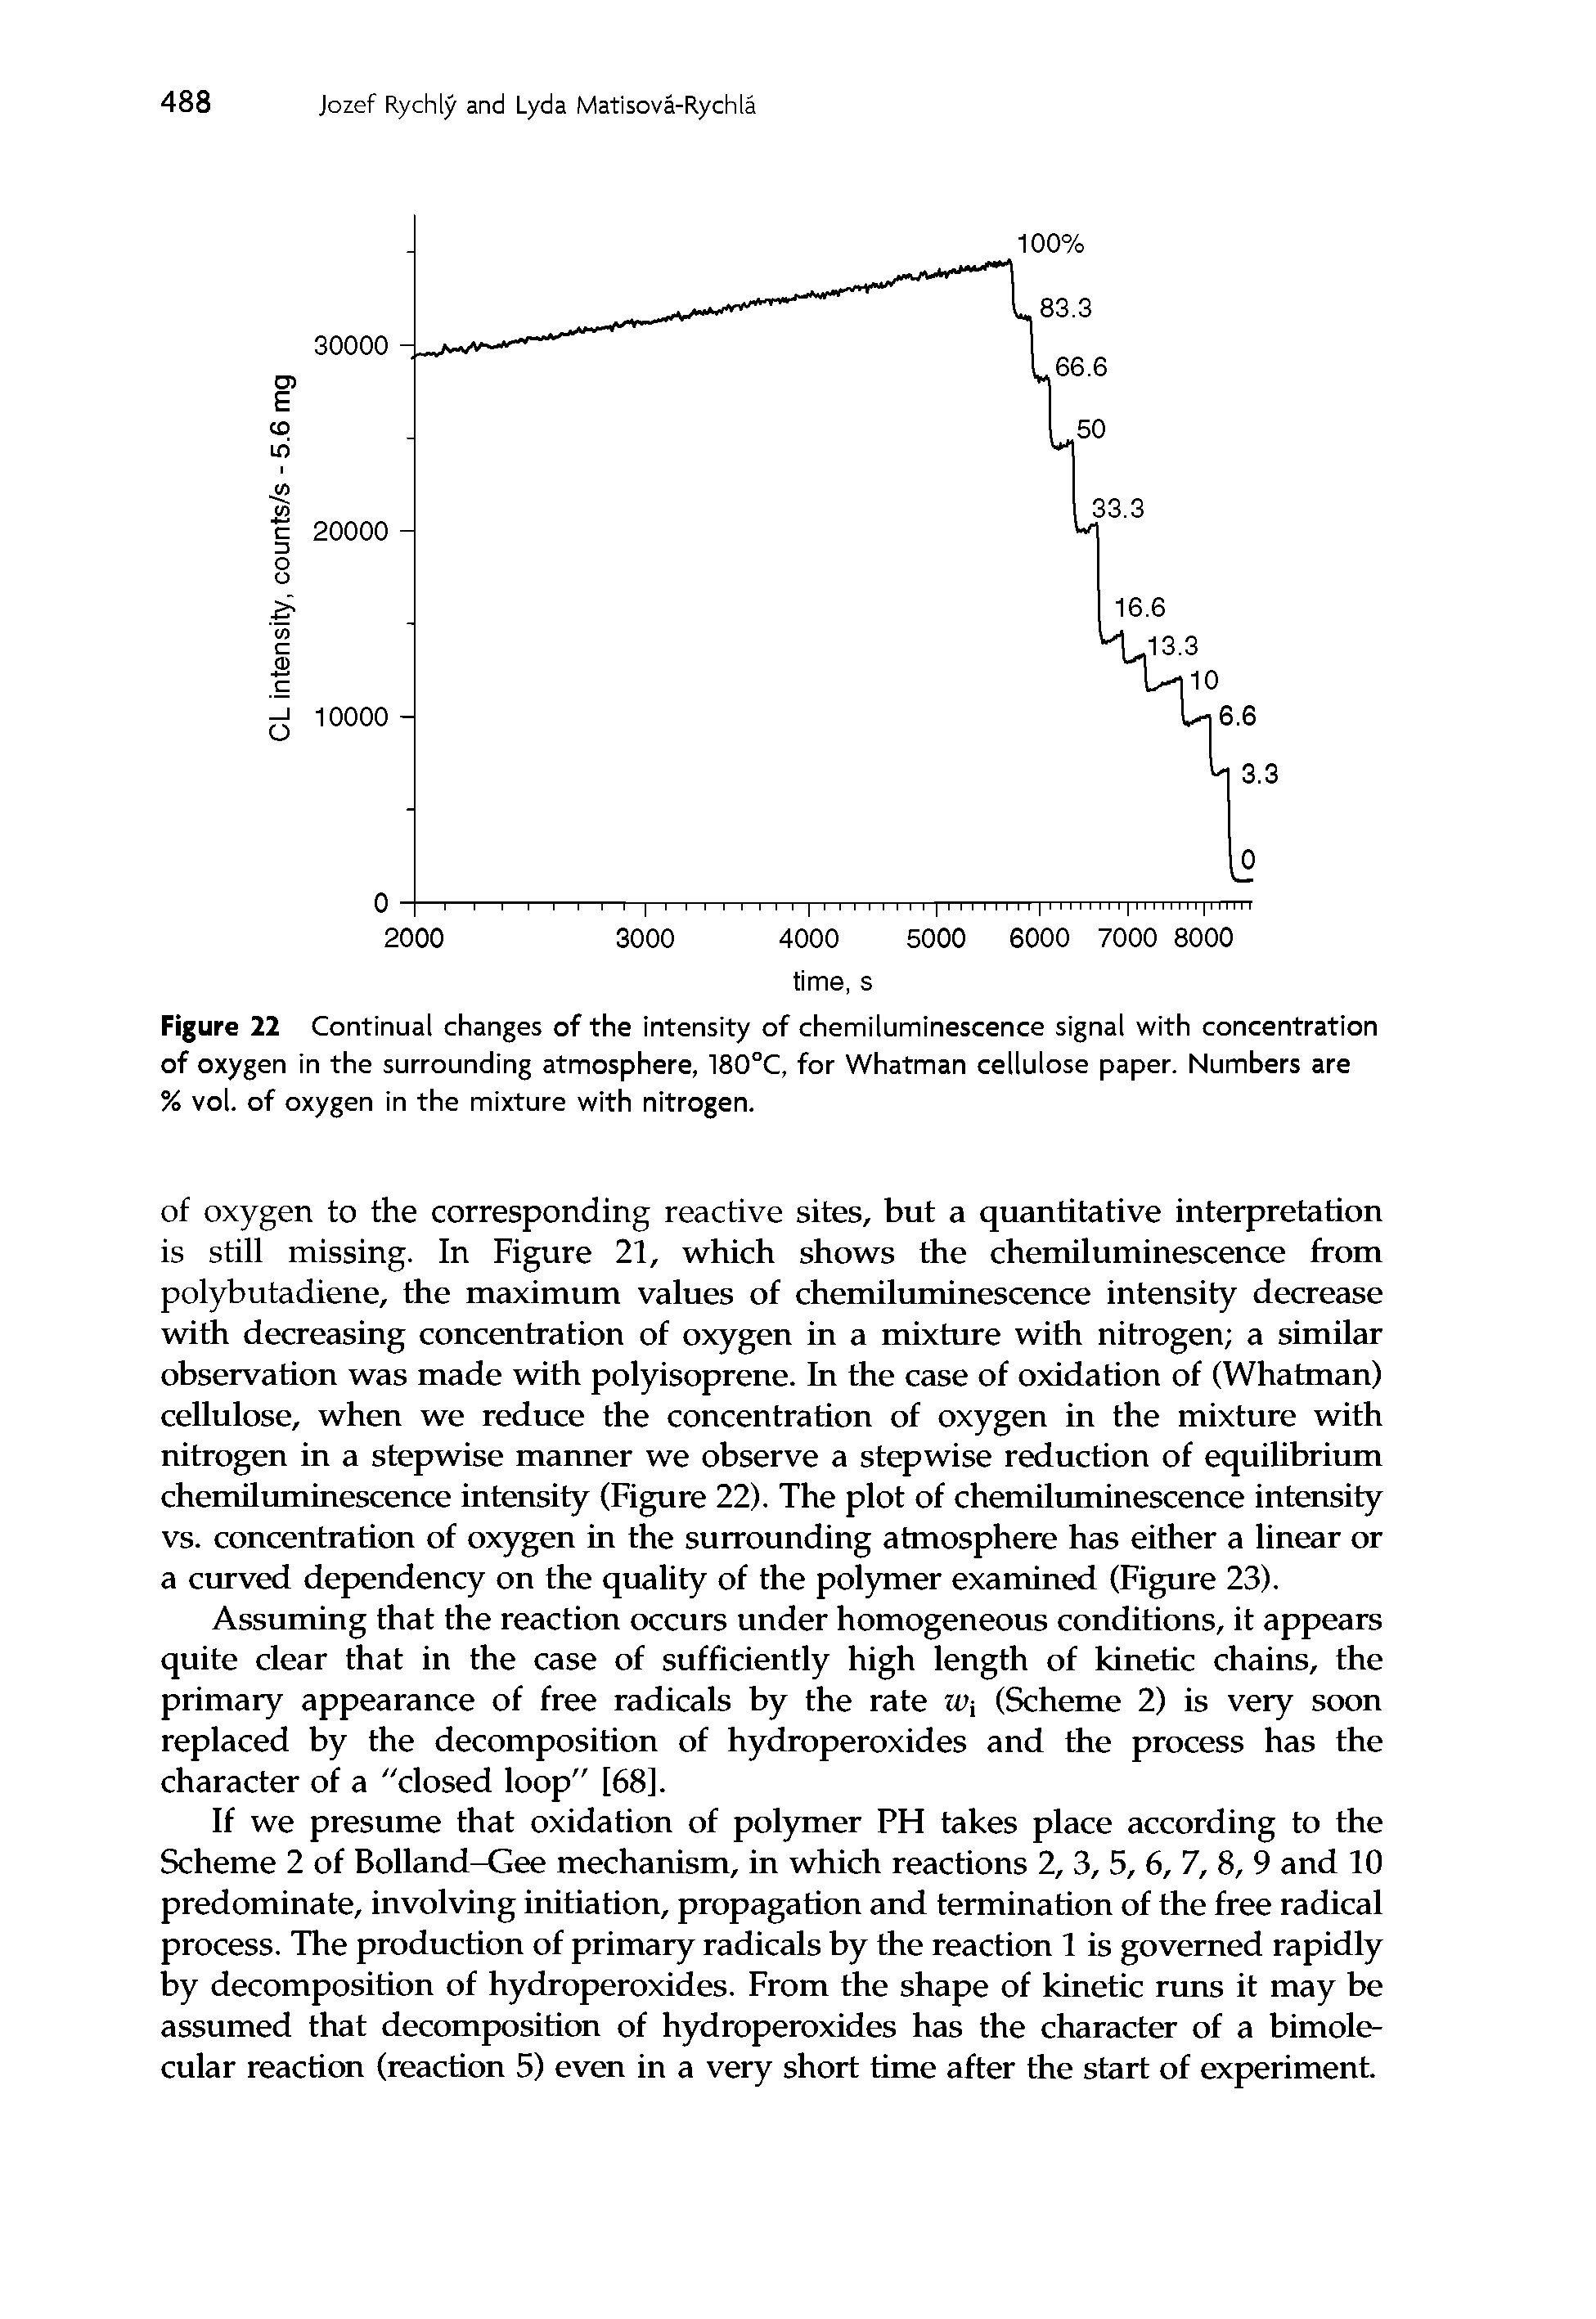 Figure 22 Continual changes of the intensity of chemiluminescence signal with concentration of oxygen in the surrounding atmosphere, 180°C, for Whatman cellulose paper. Numbers are % vol. of oxygen in the mixture with nitrogen.